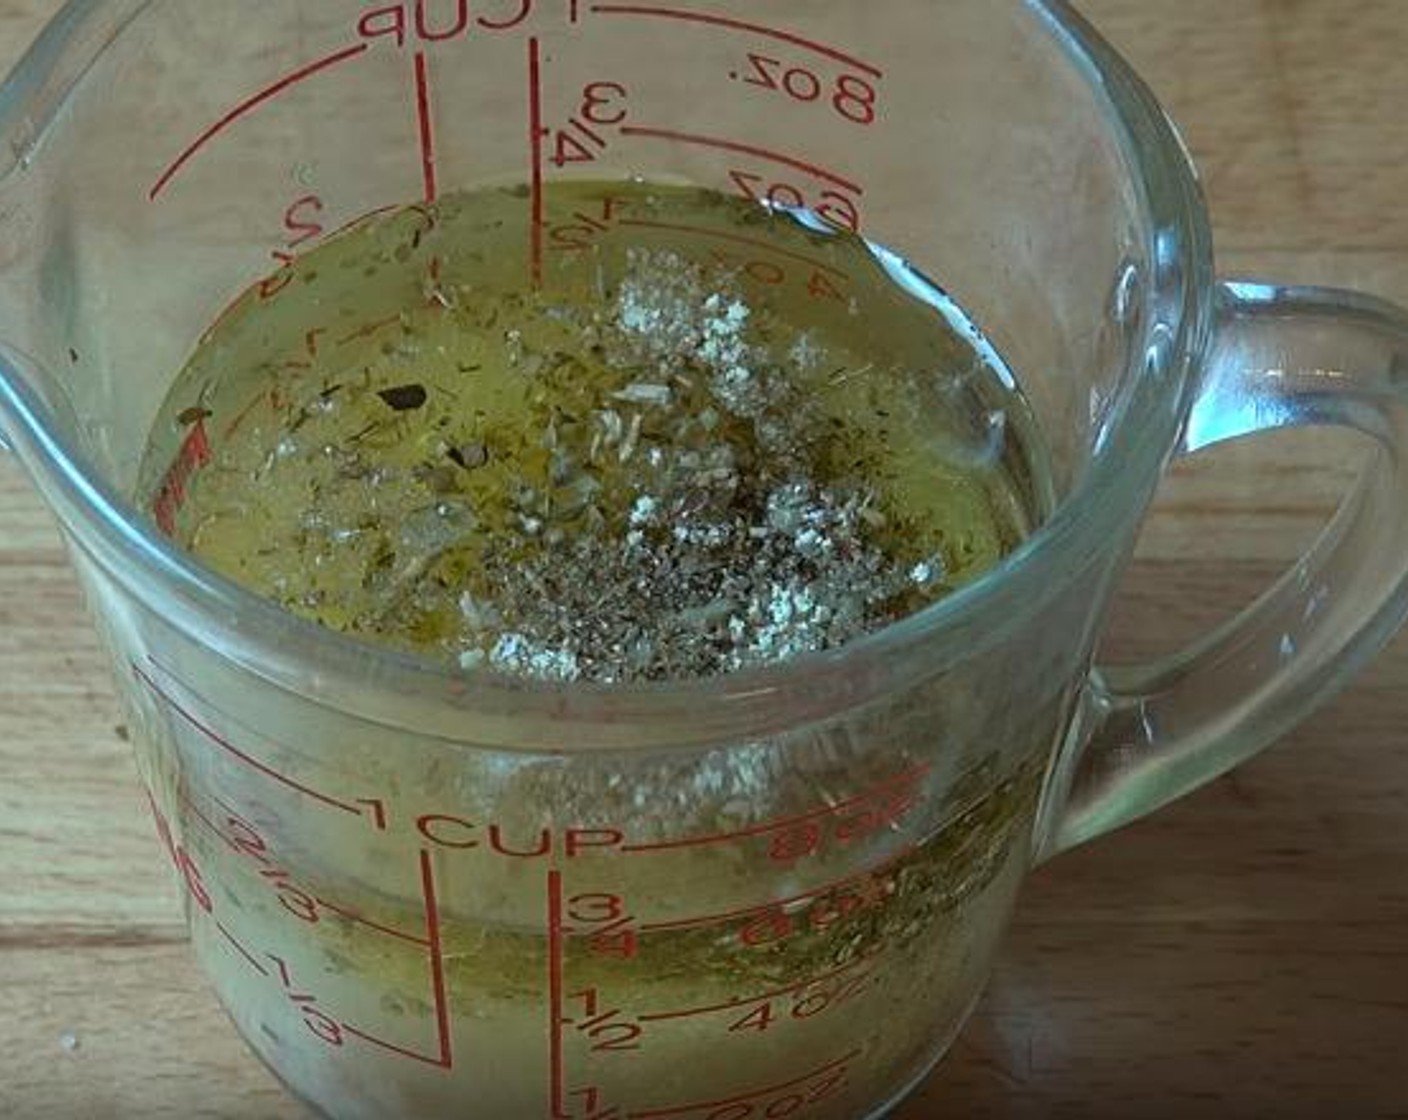 step 1 In a small jug, add Olive Oil (1/4 cup), the juice from Lemons (2), Dried Oregano (1 tsp), Onion Powder (1 tsp), Garlic (2 cloves), Salt (1 tsp), and Freshly Ground Black Pepper (to taste). Stir together.